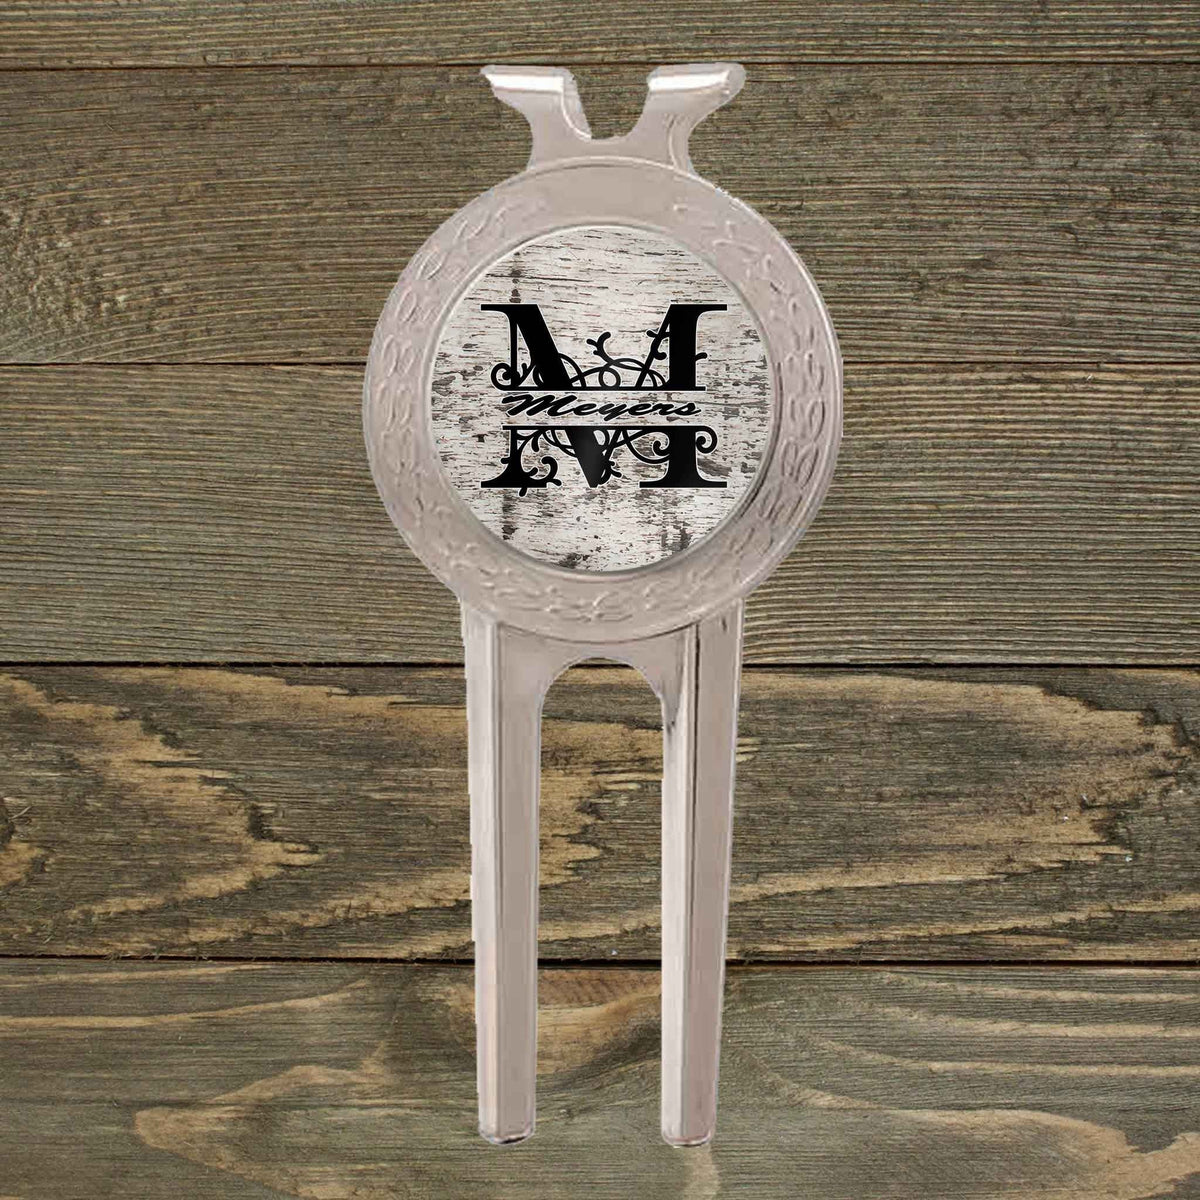 Personalized Divot Repair Tool | Golf Accessories | Golf Gifts | Distressed Wood Monogram